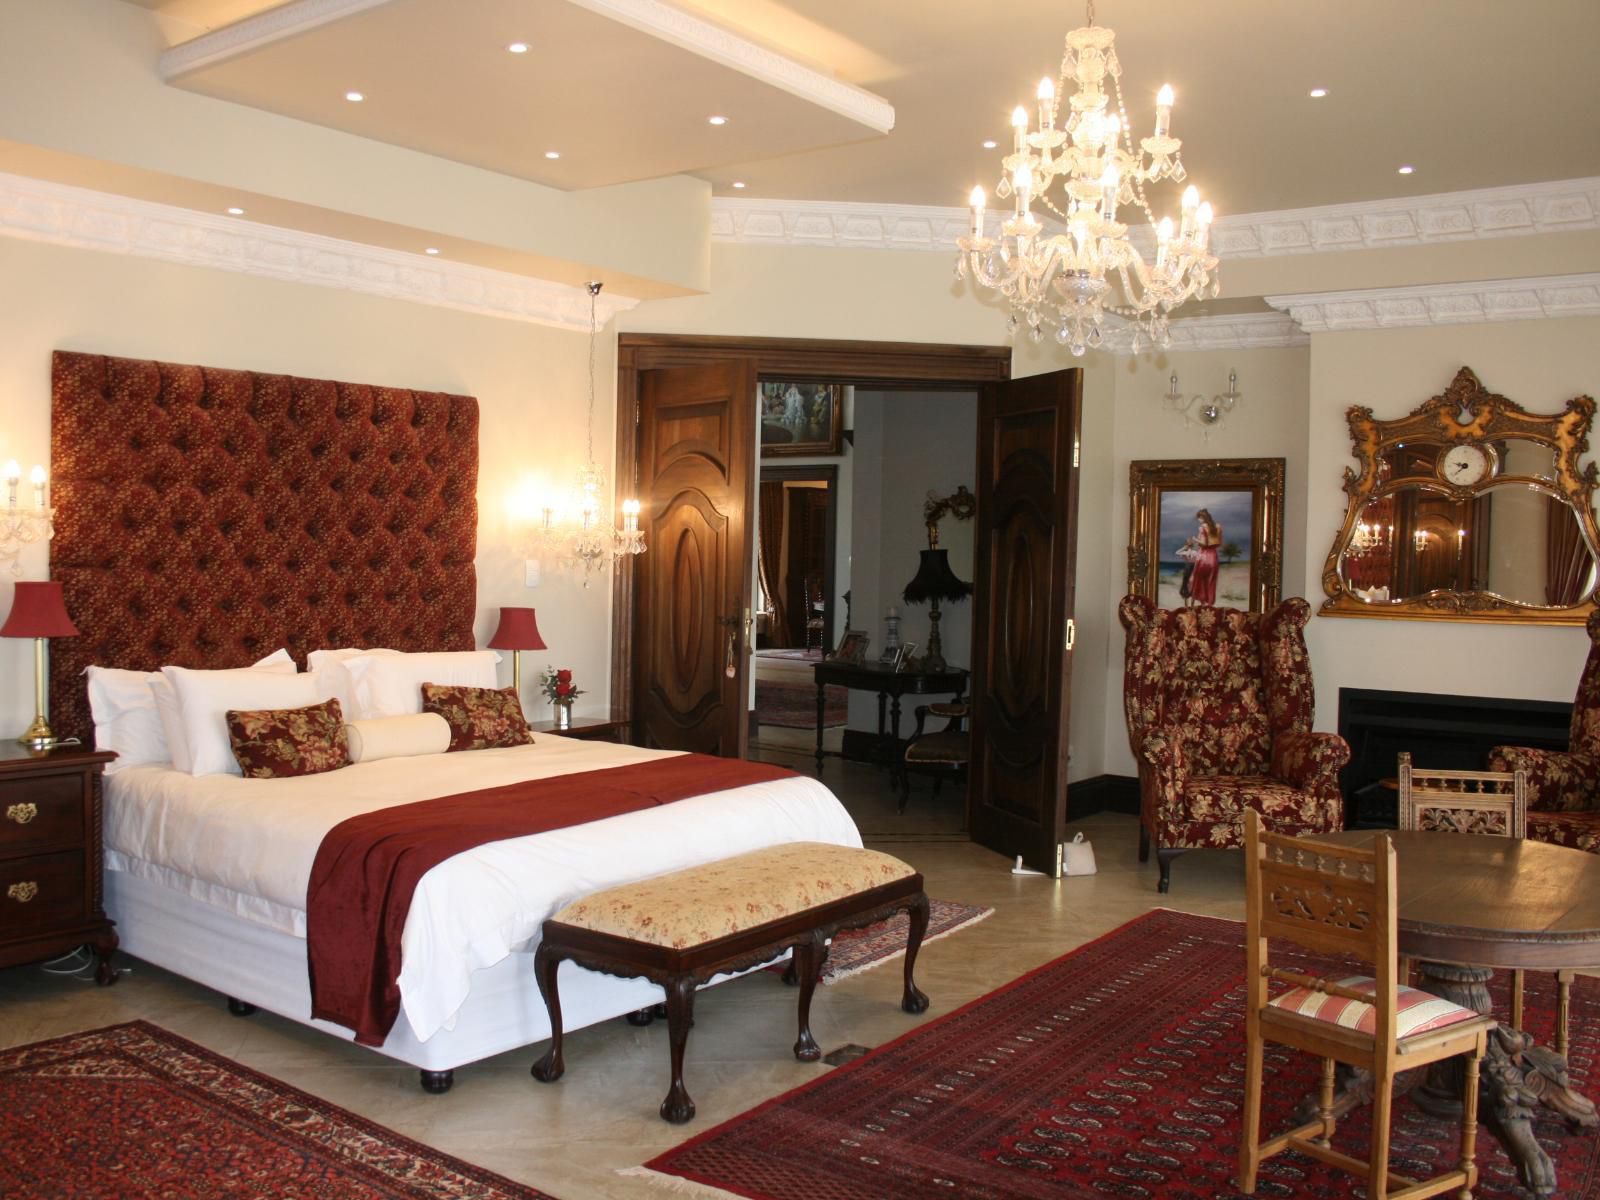 The Duke S Manor Modimolle Nylstroom Limpopo Province South Africa Bedroom